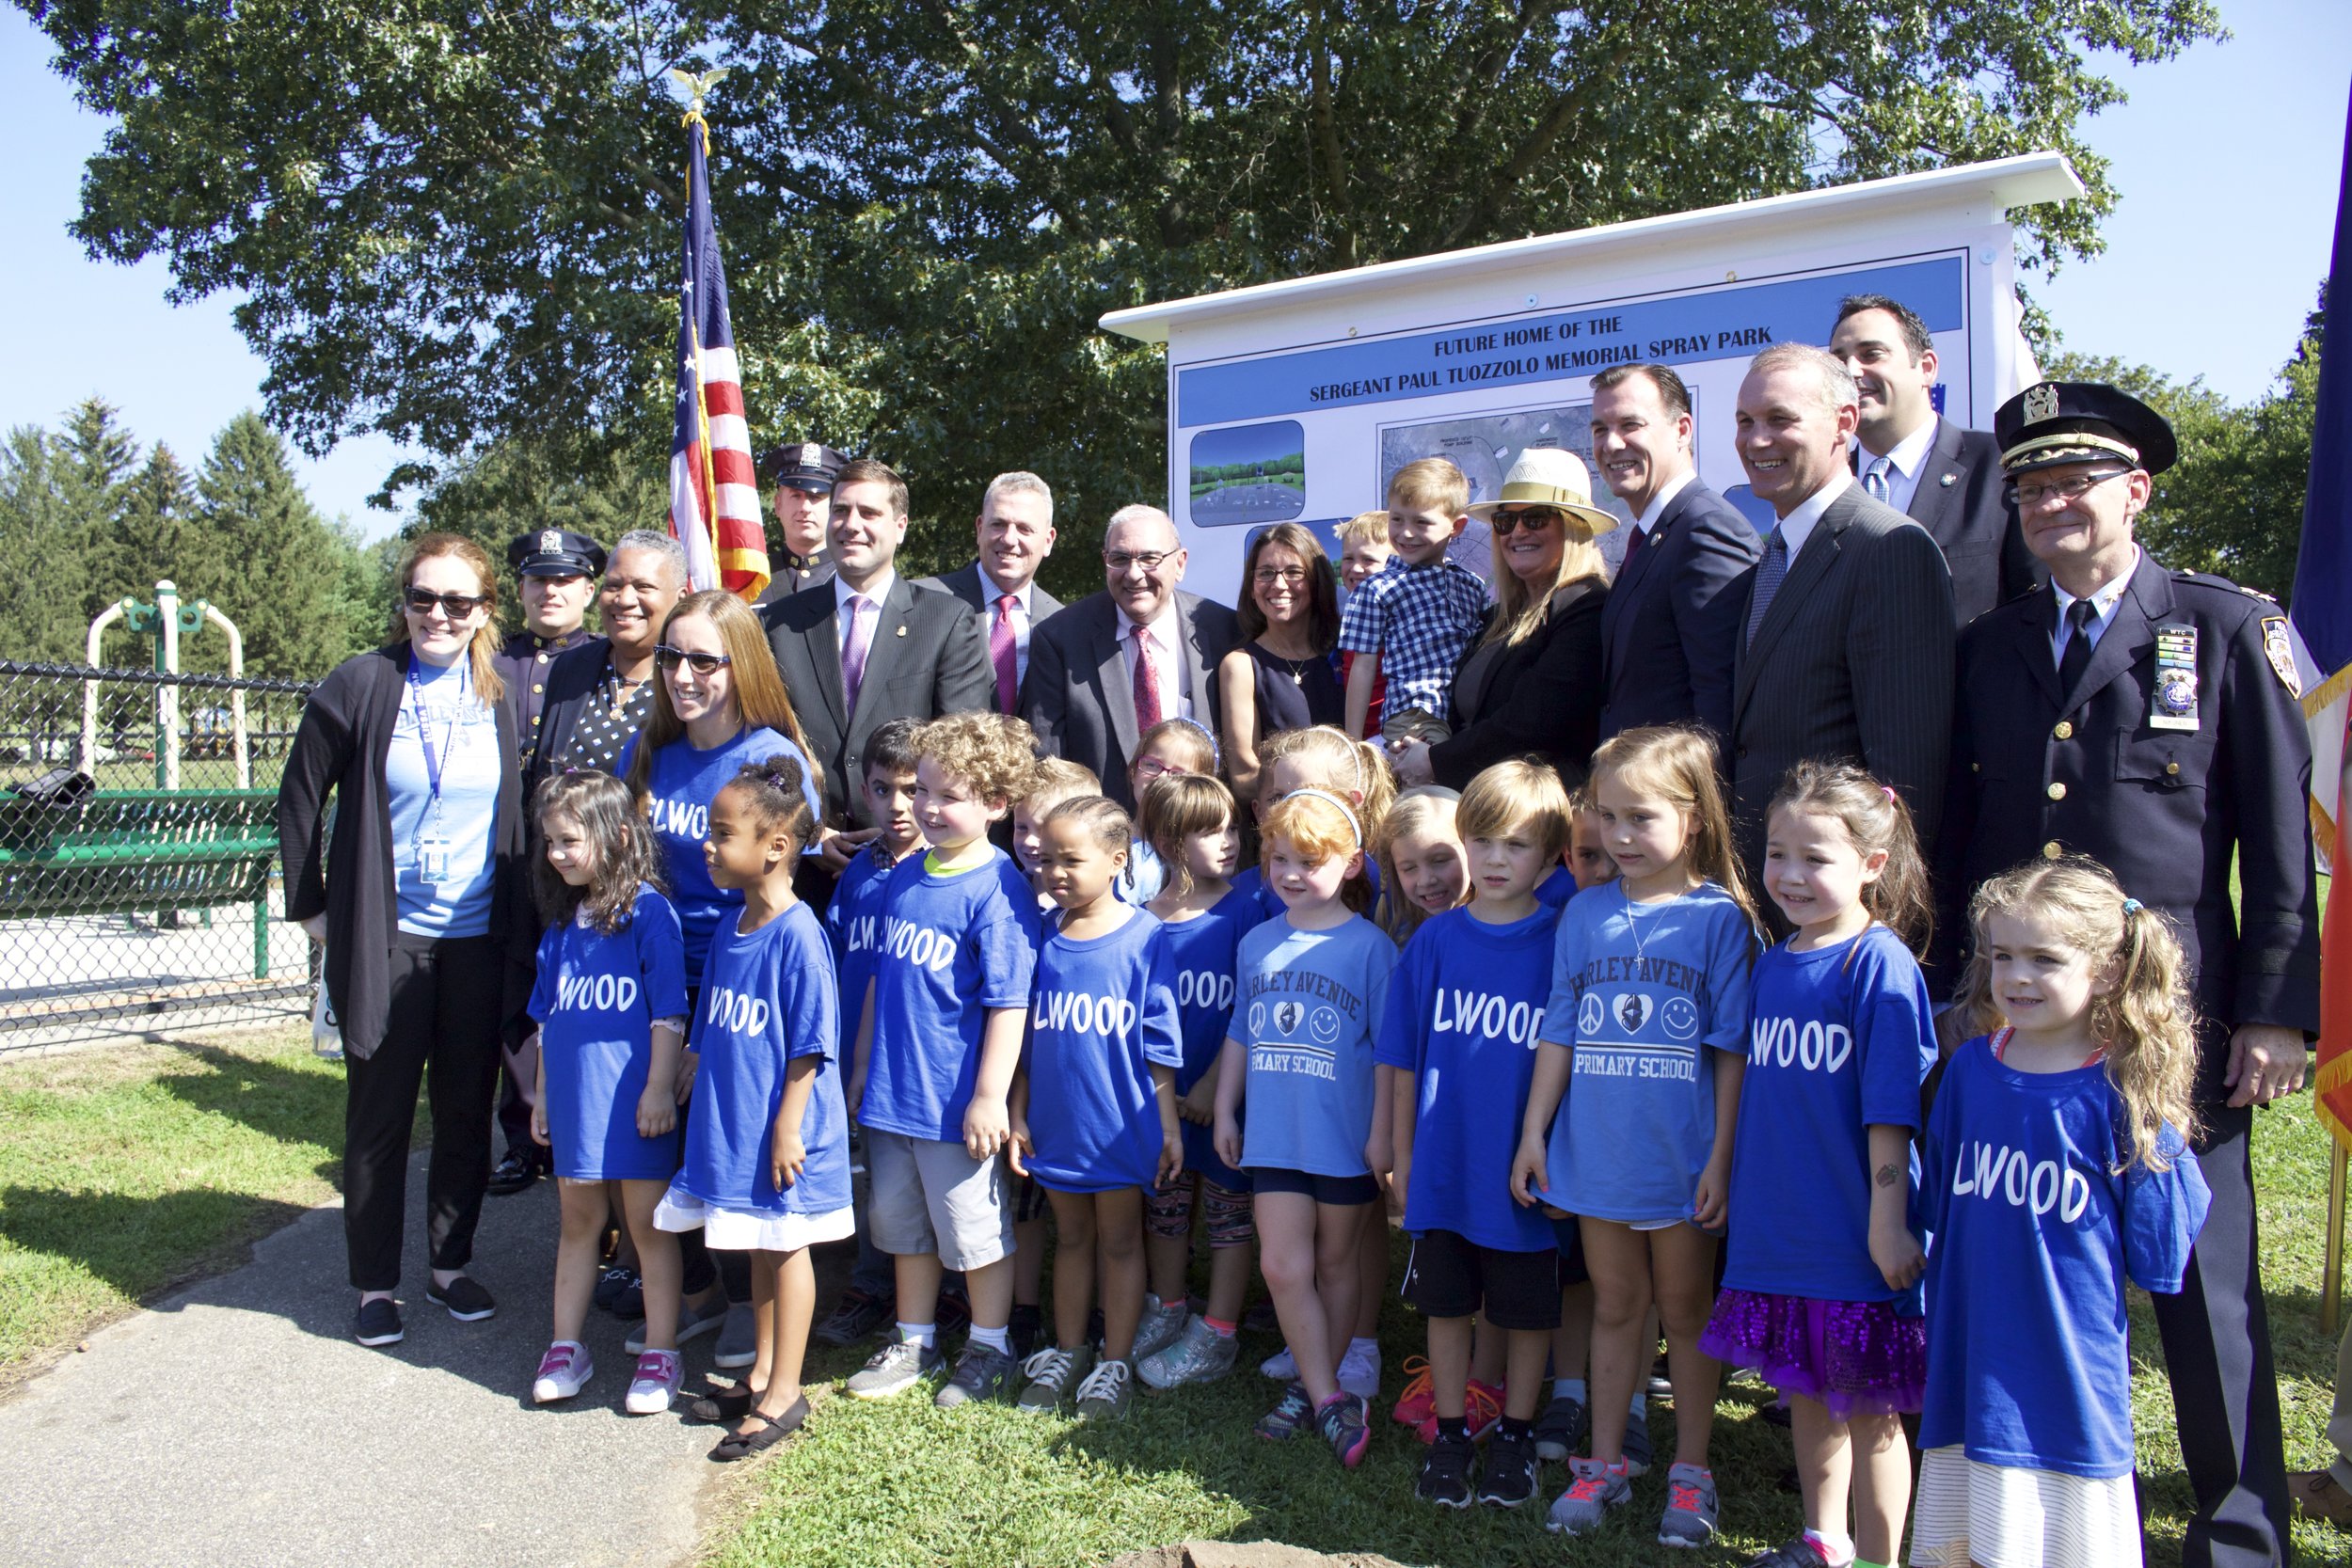   Town of Huntington officials announced plans to build a spray park at Elwood Park in memory of New York Police Department Sgt. Paul Tuozzolo.   Long Islander News photo/Janee Law  